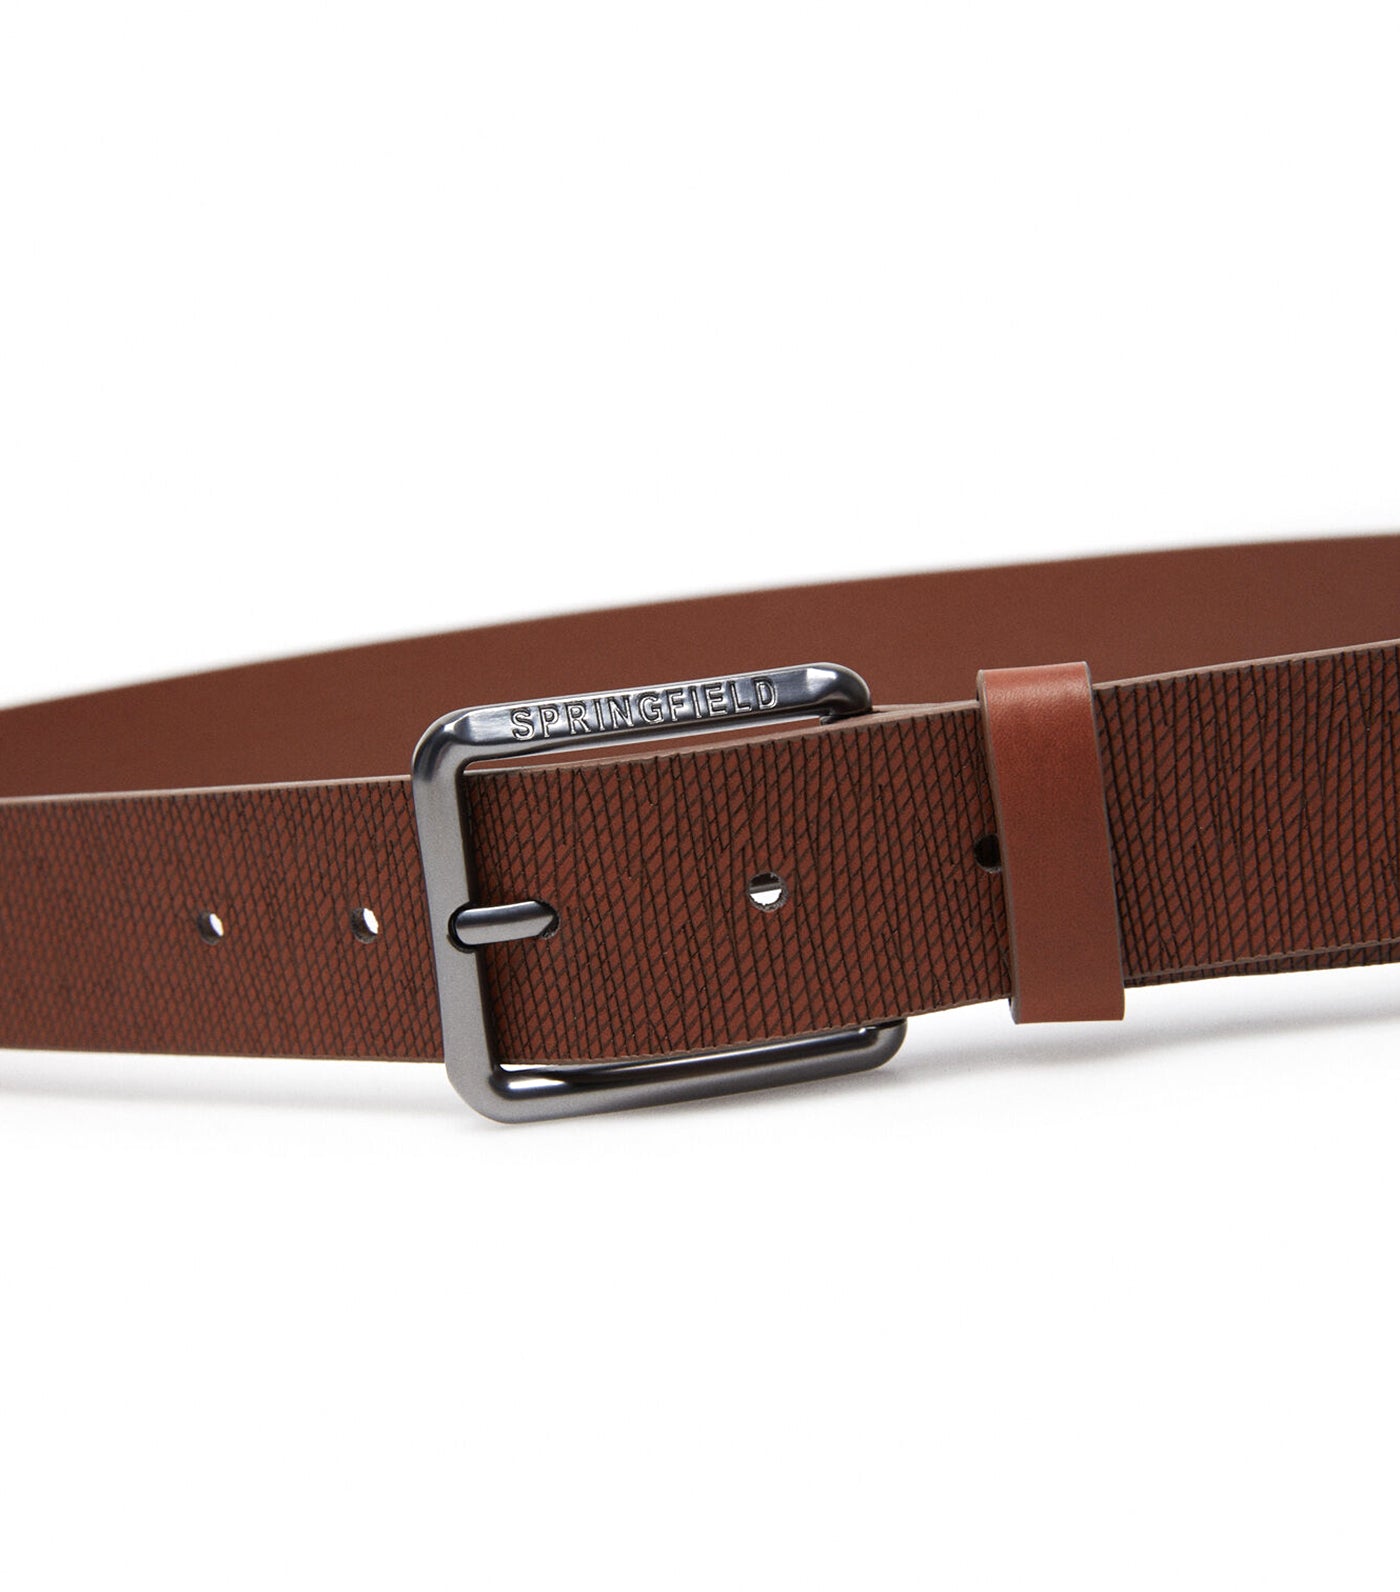 Textured Leather Effect Belt Tan